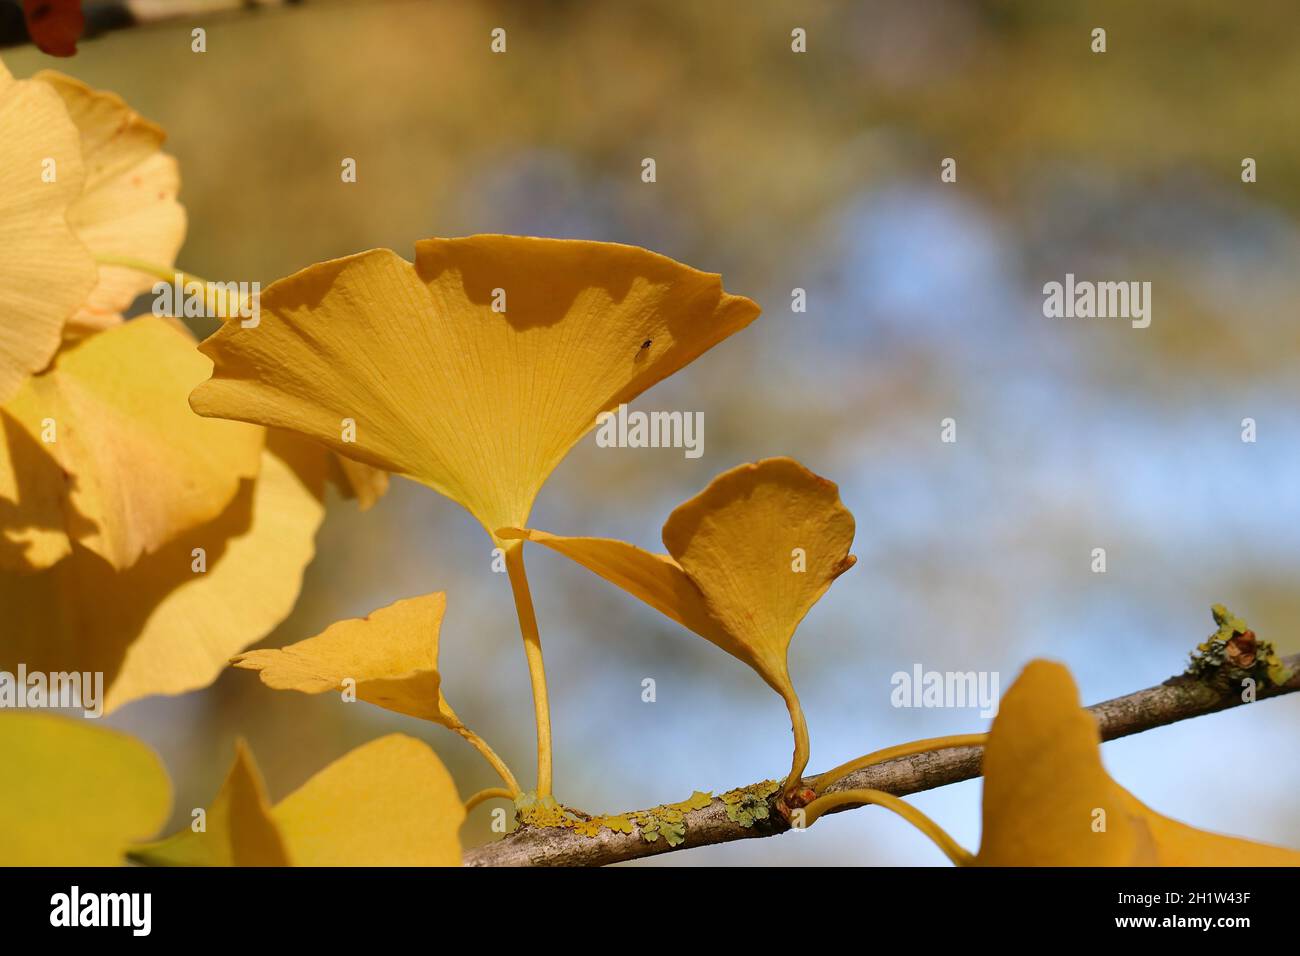 Close-up of some pretty yellow sunlit ginko leaves on a branch, with a view from below and blurred natural background Stock Photo